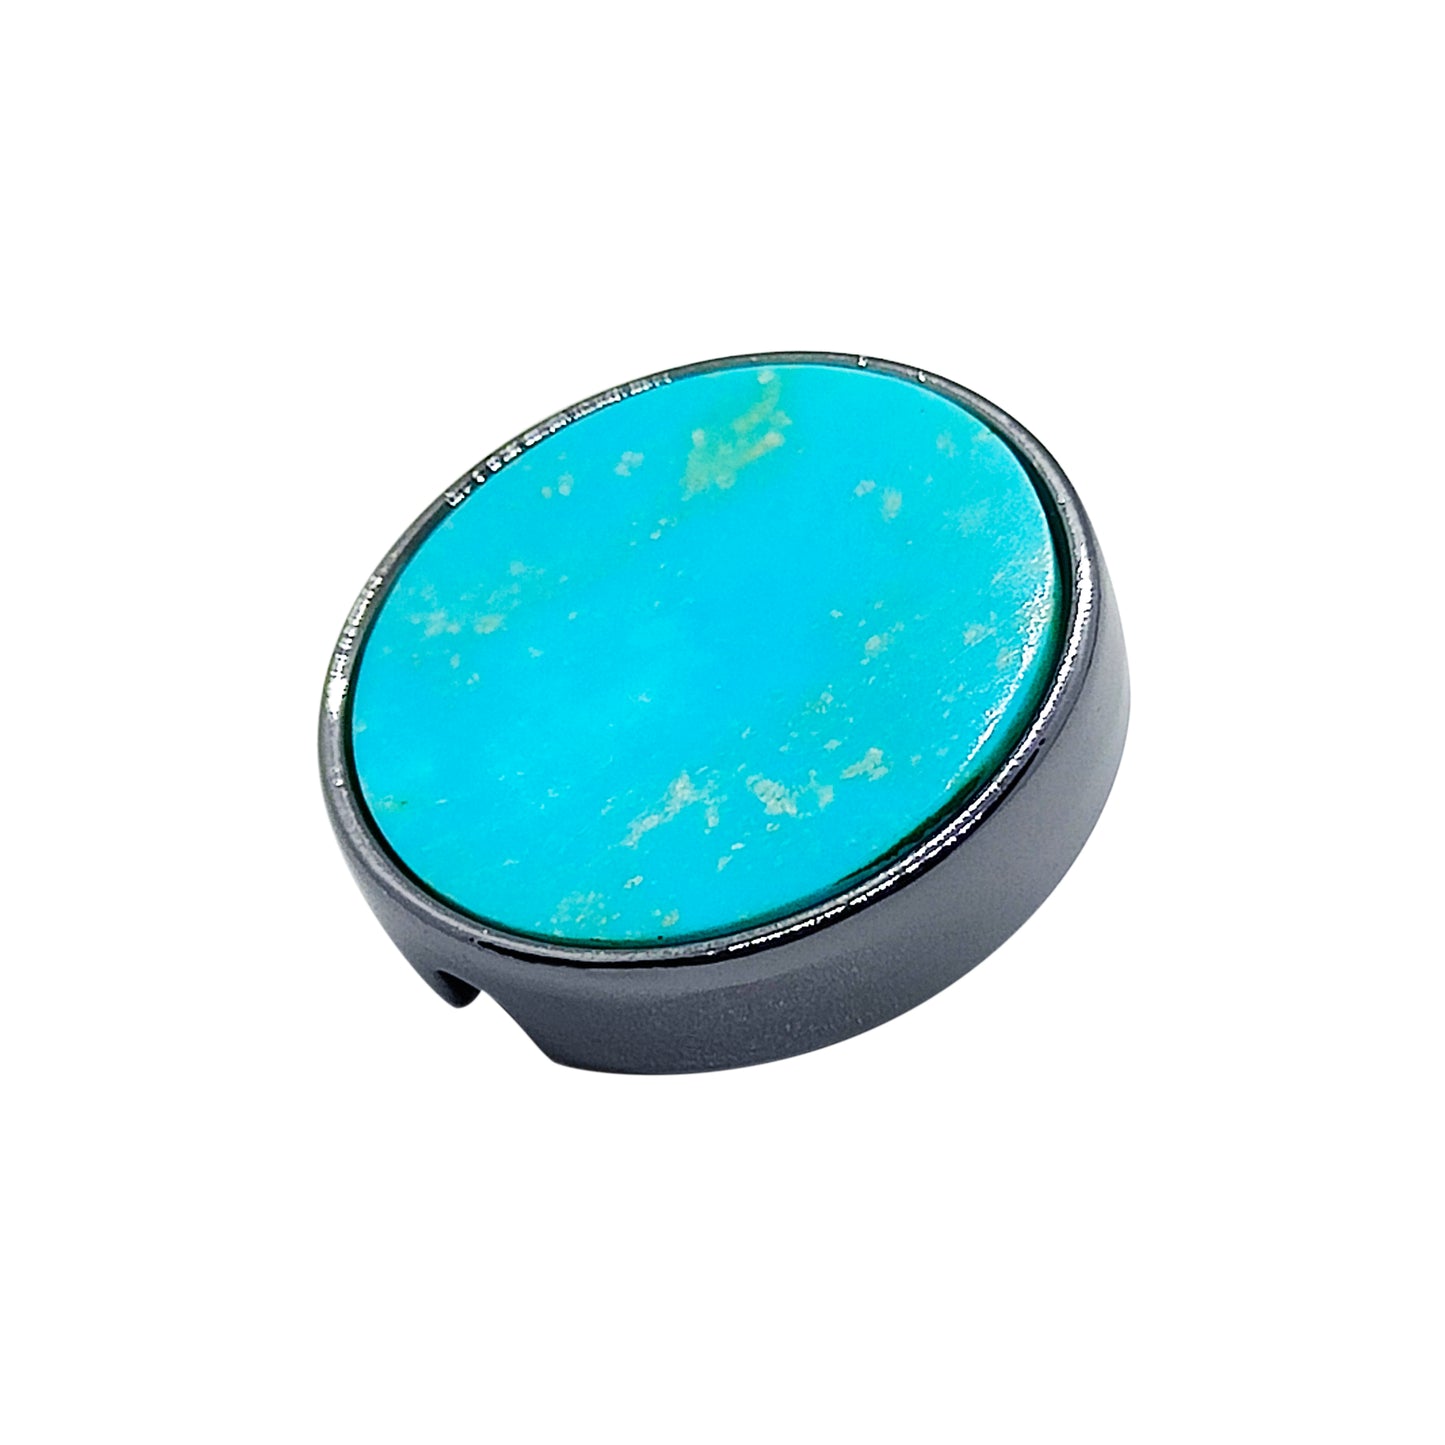 21mm button in brushed silver metal and Arizona turquoise